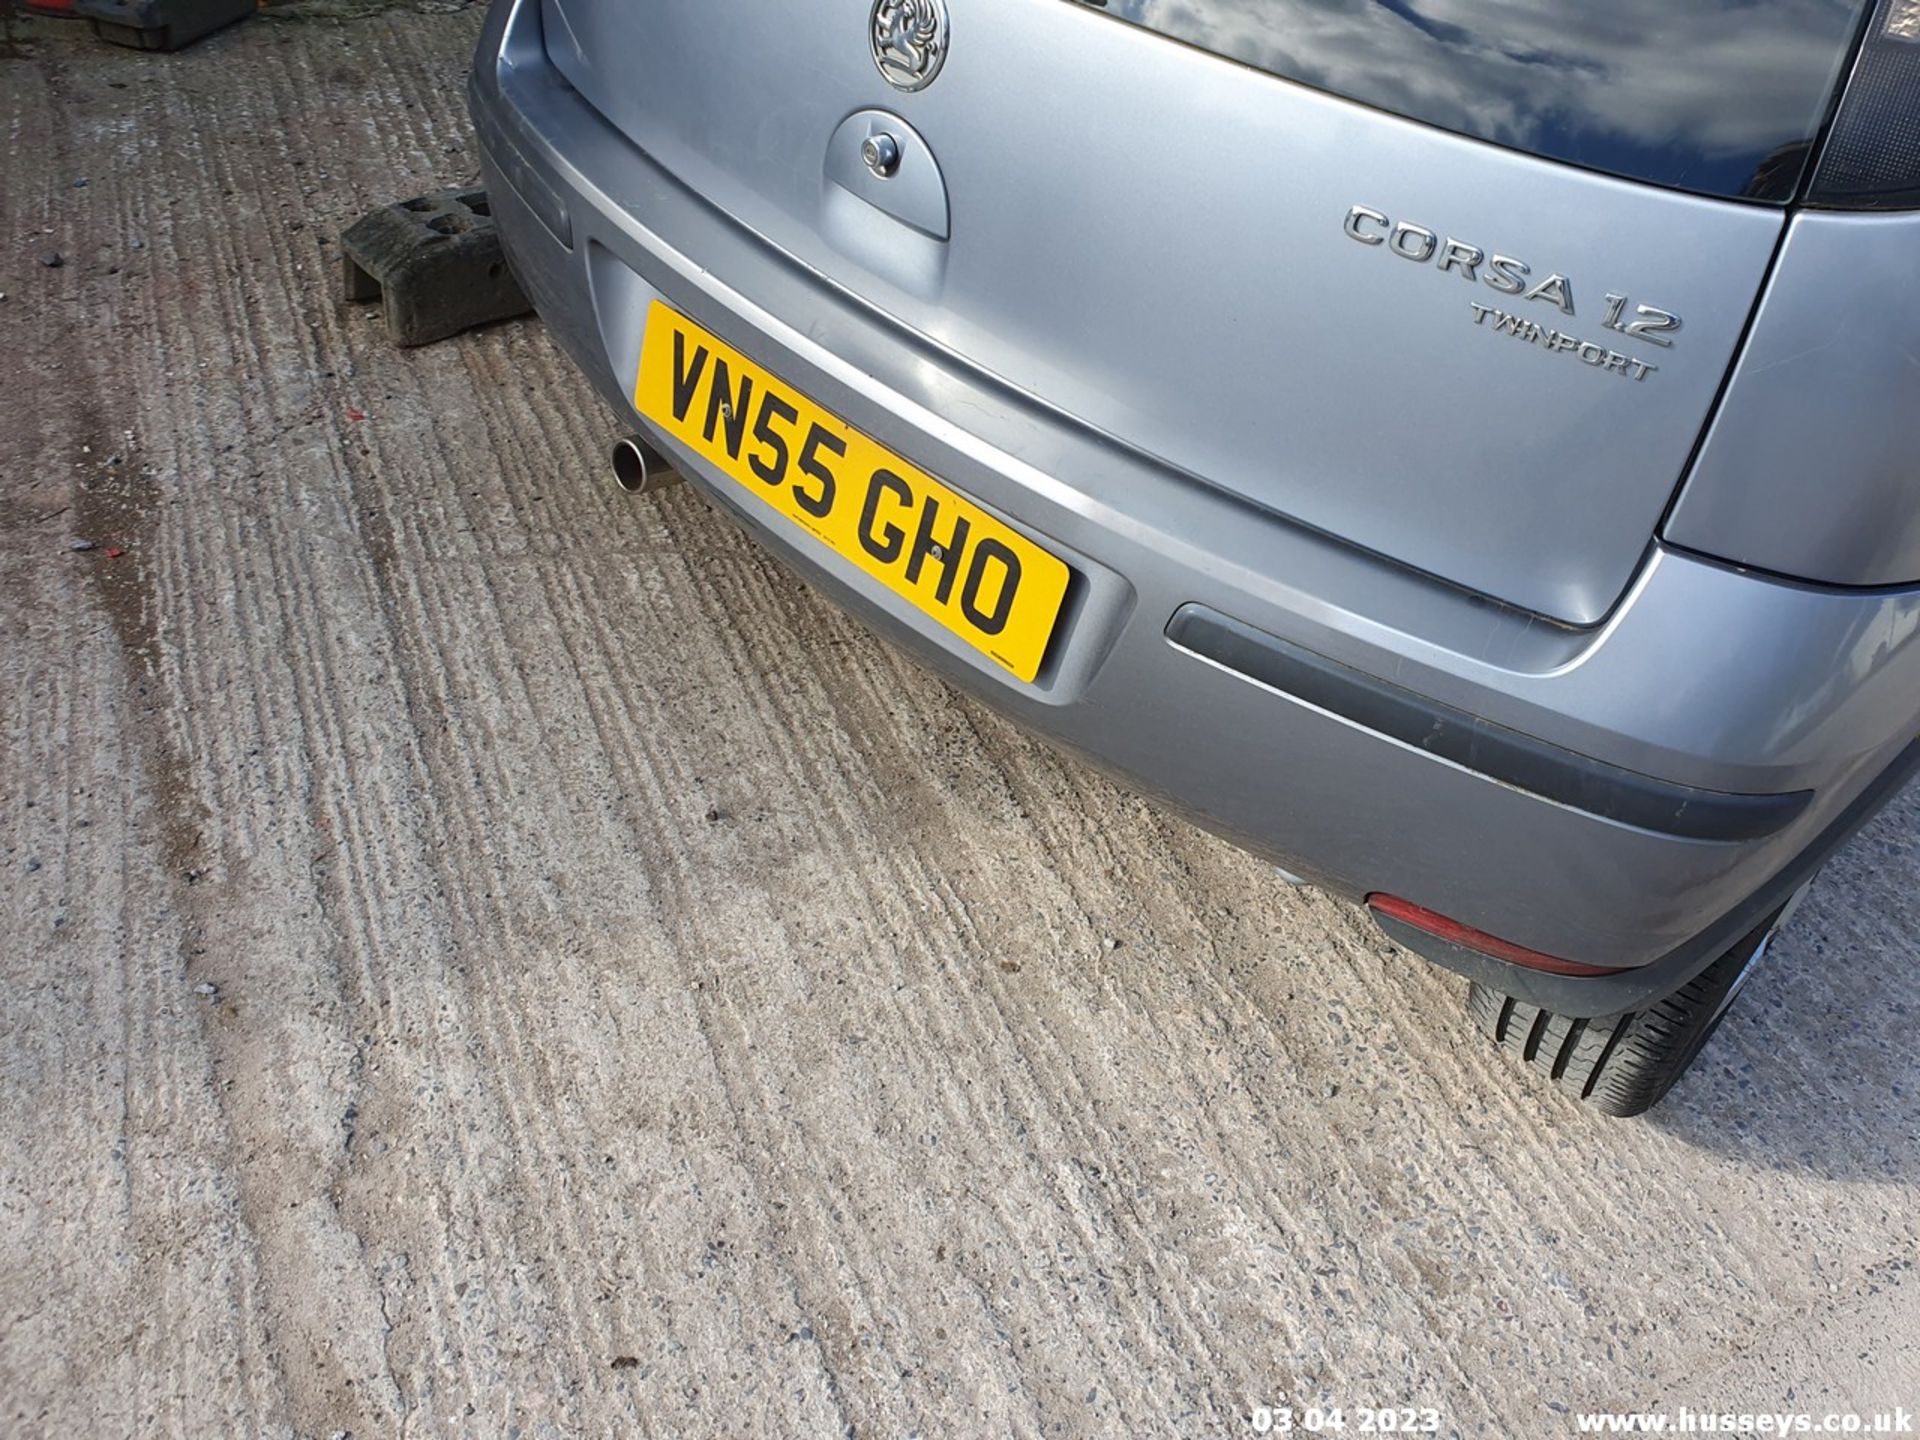 05/55 VAUXHALL CORSA SXI TWINPORT - 1229cc 3dr Hatchback (Silver) - Image 35 of 44